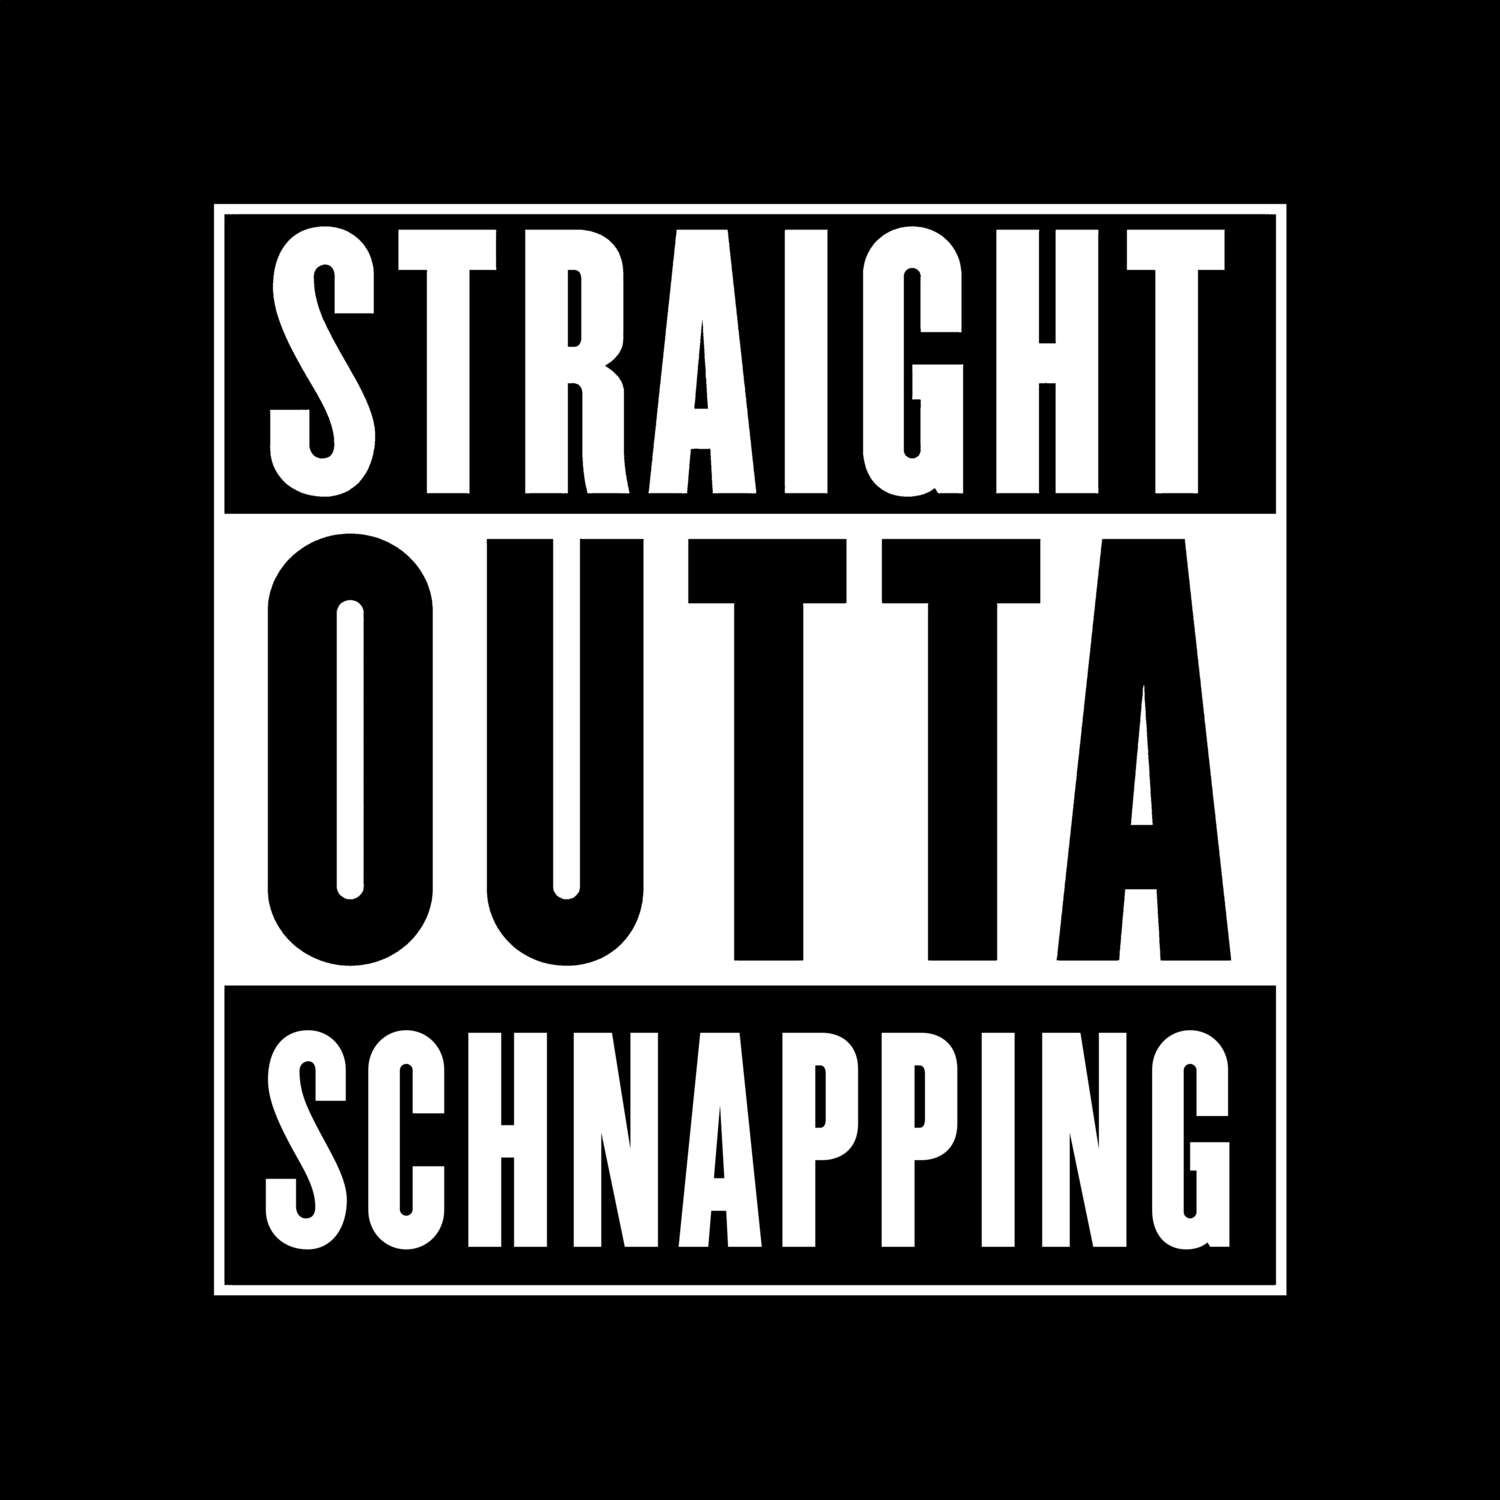 Schnapping T-Shirt »Straight Outta«